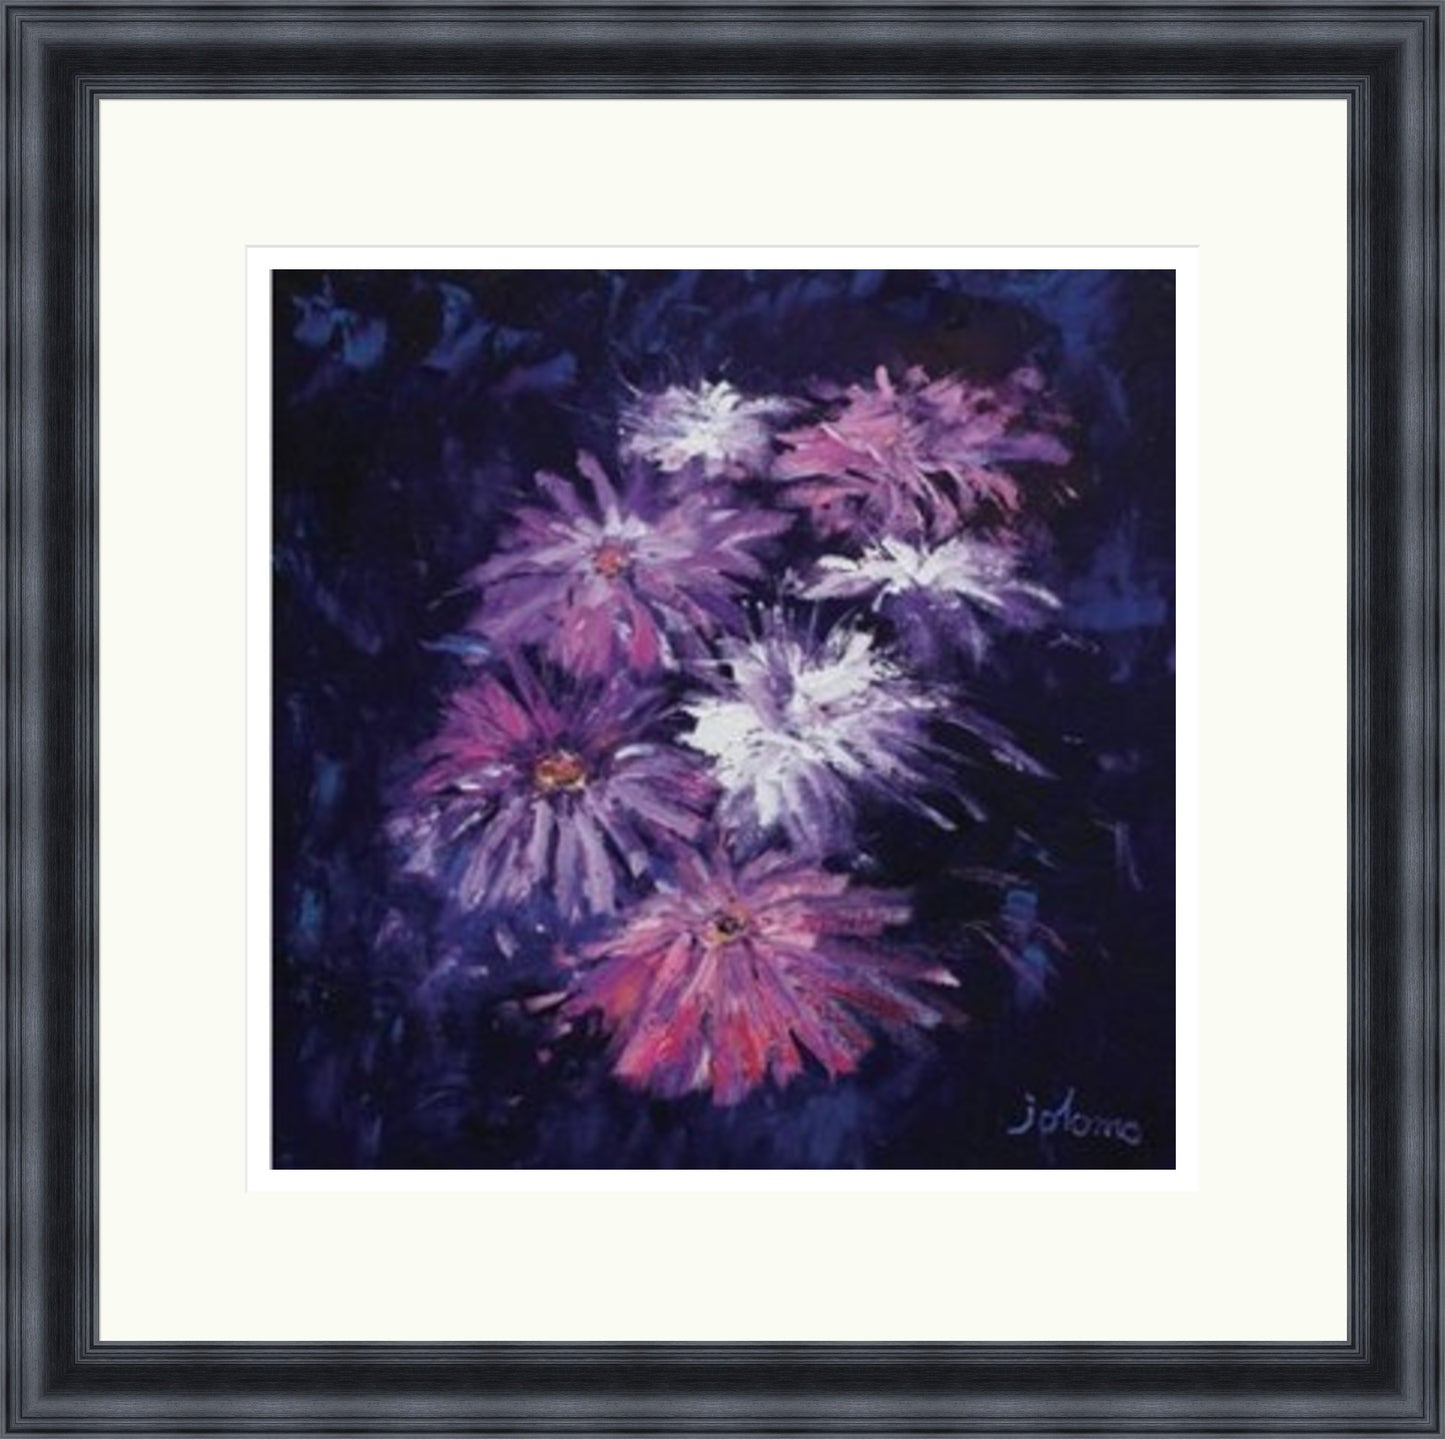 Big Blooms Signed Limited Edition by John Lowrie Morrison (JOLOMO)